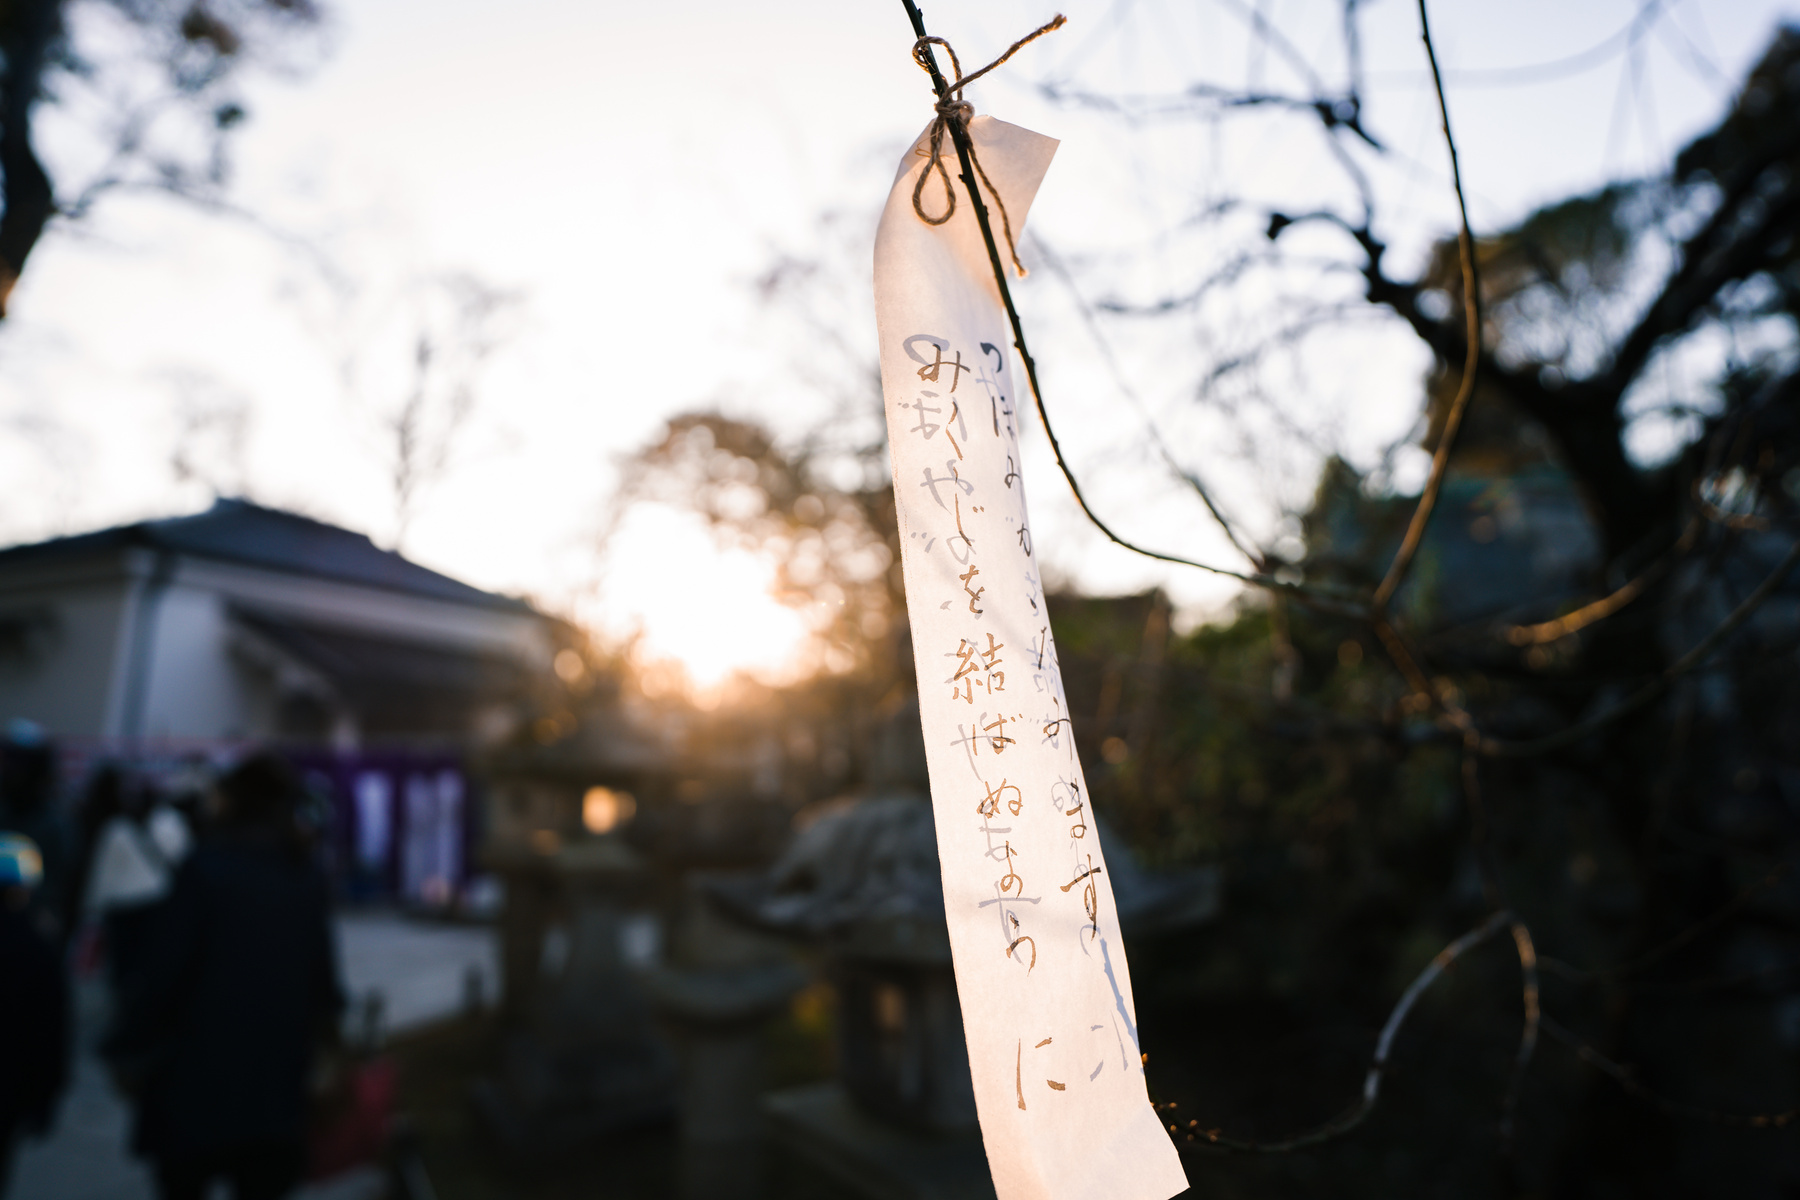 A White Cloth with Japanese Calligraphy Hanging on a Stem